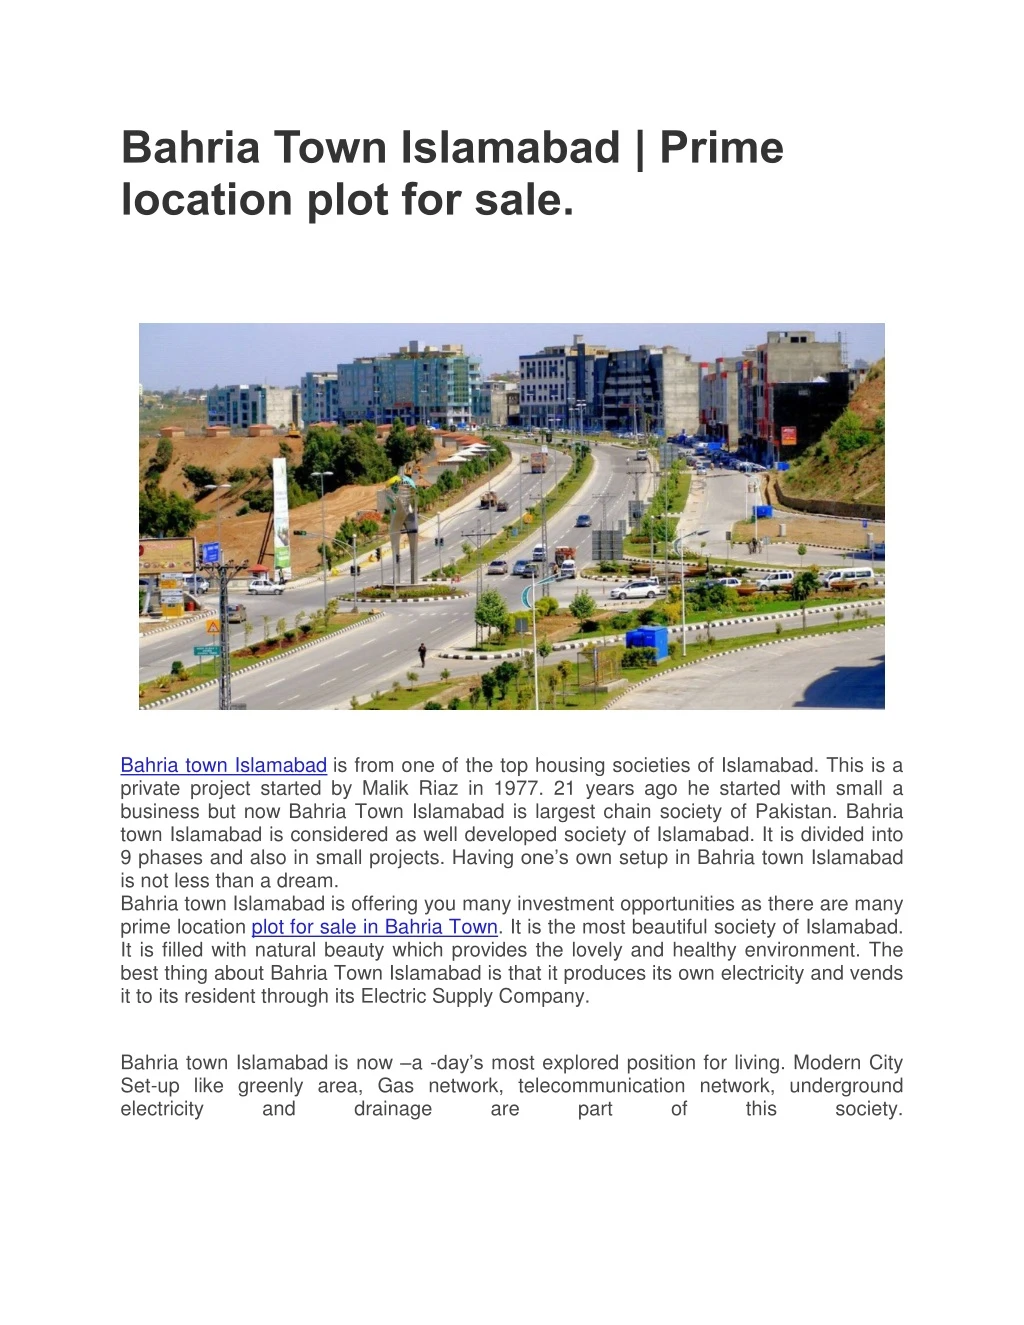 bahria town islamabad prime location plot for sale